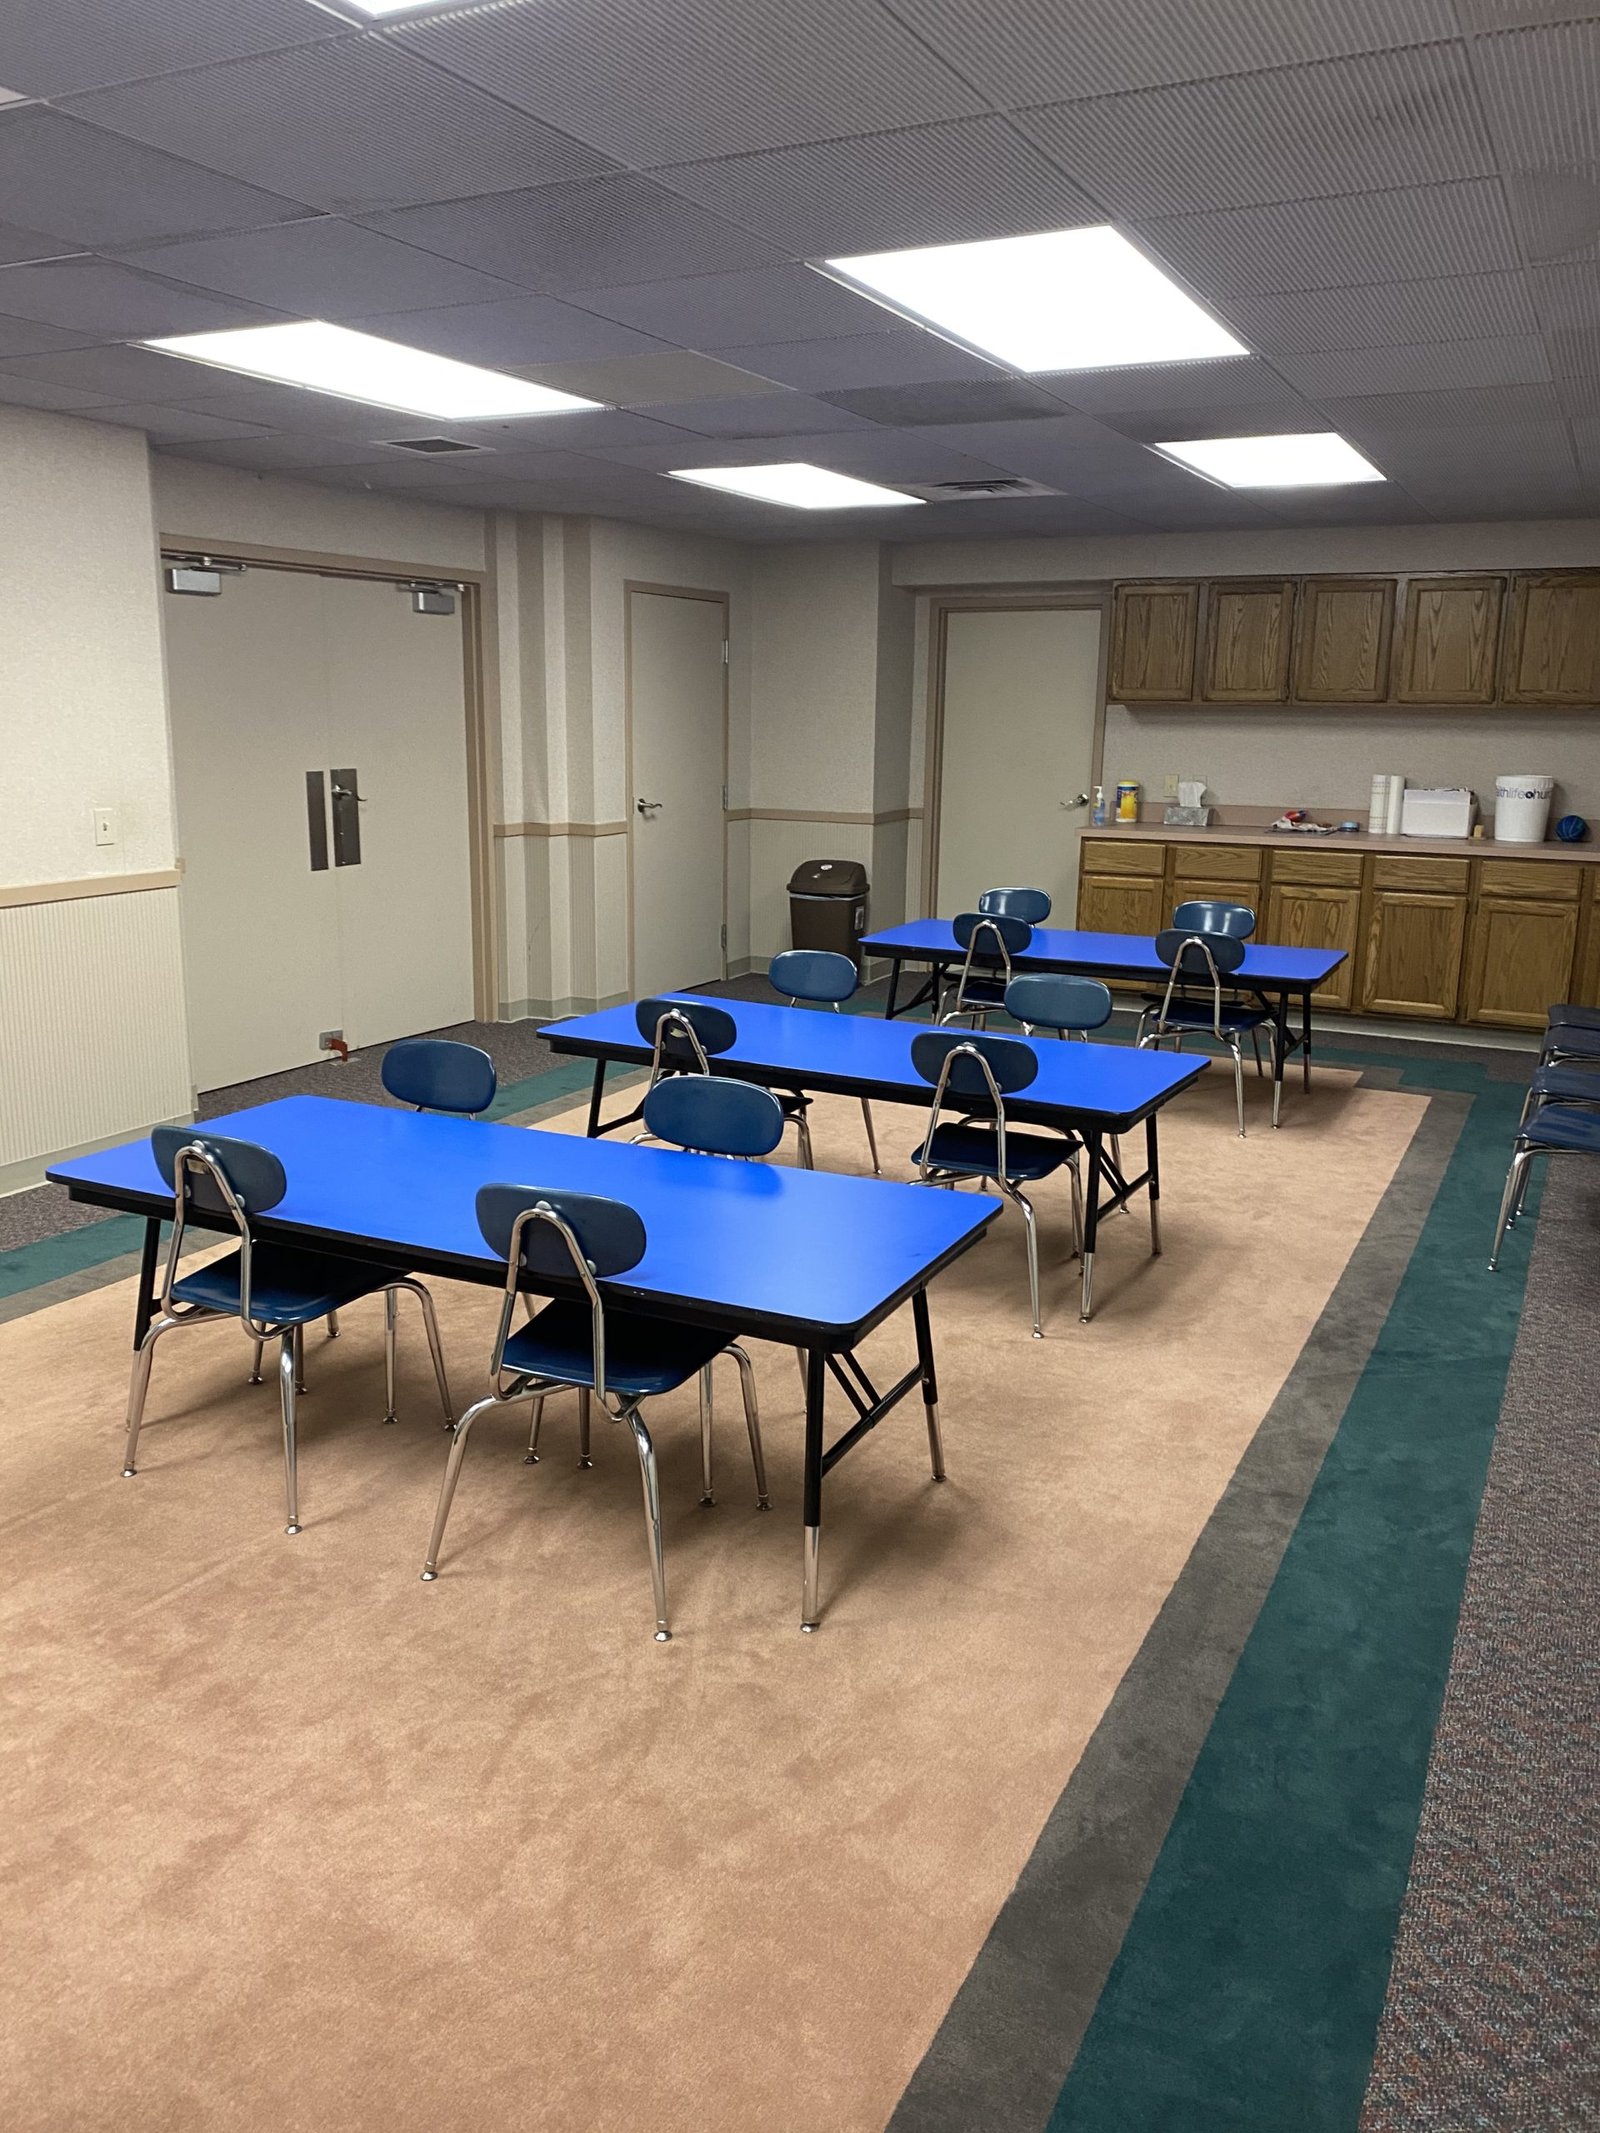 dine room cleaning service in Kalamazoo Michigan cleaning service in Kalamazoo Michigan